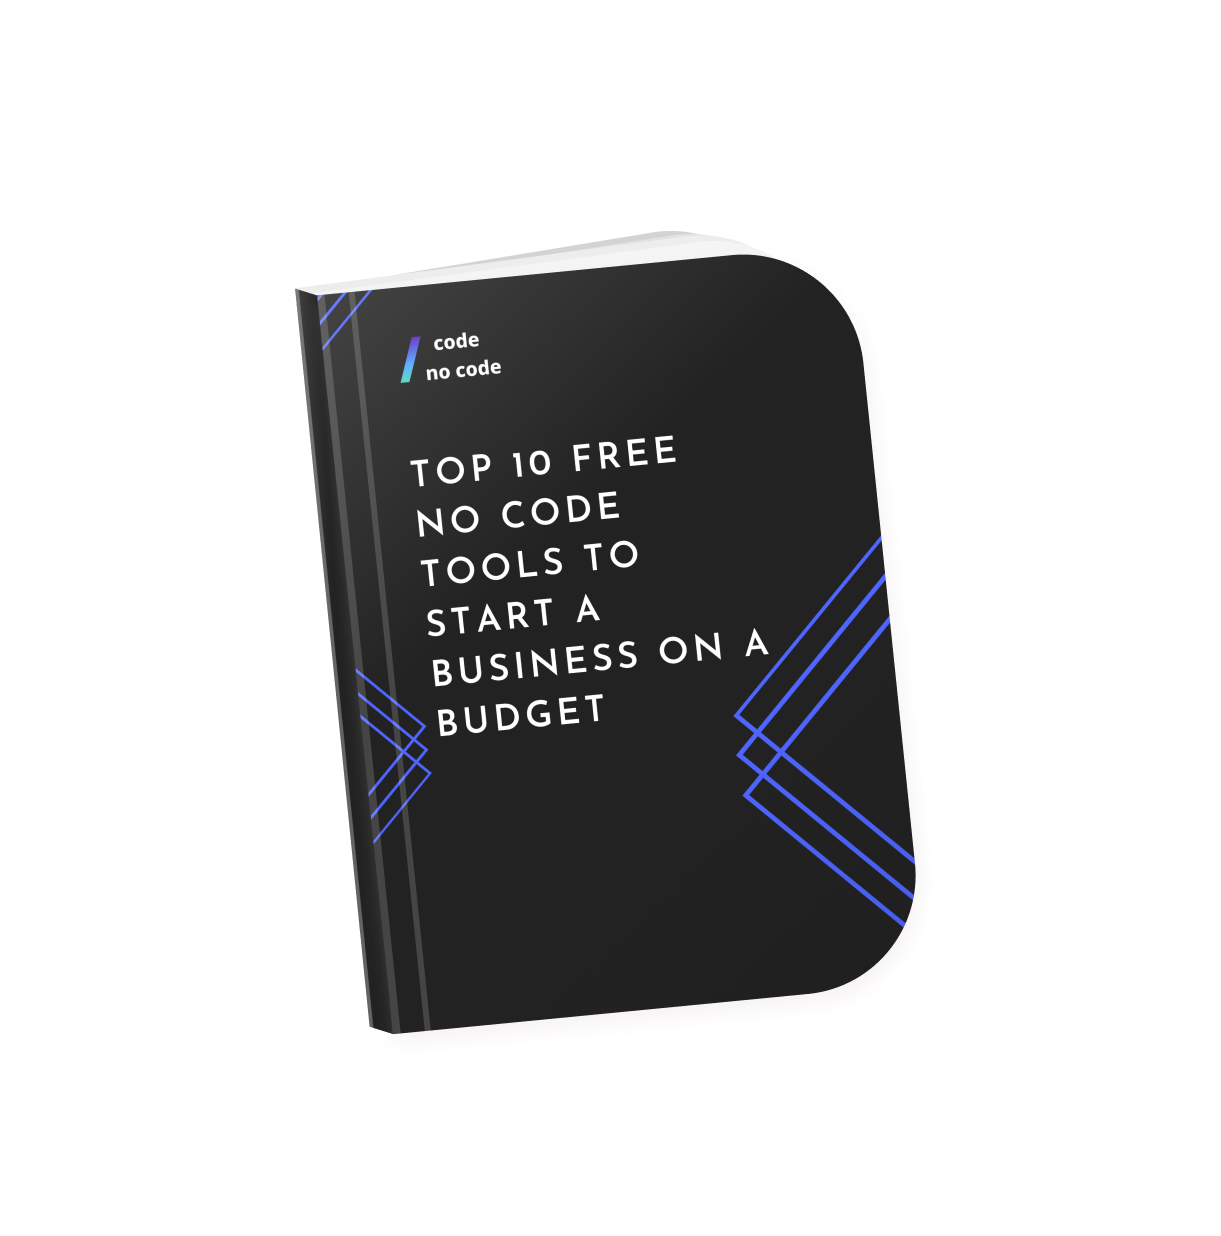 Download our free e-book and discover 10 no-code tools with great free plans that can be used as alternatives to expensive tools